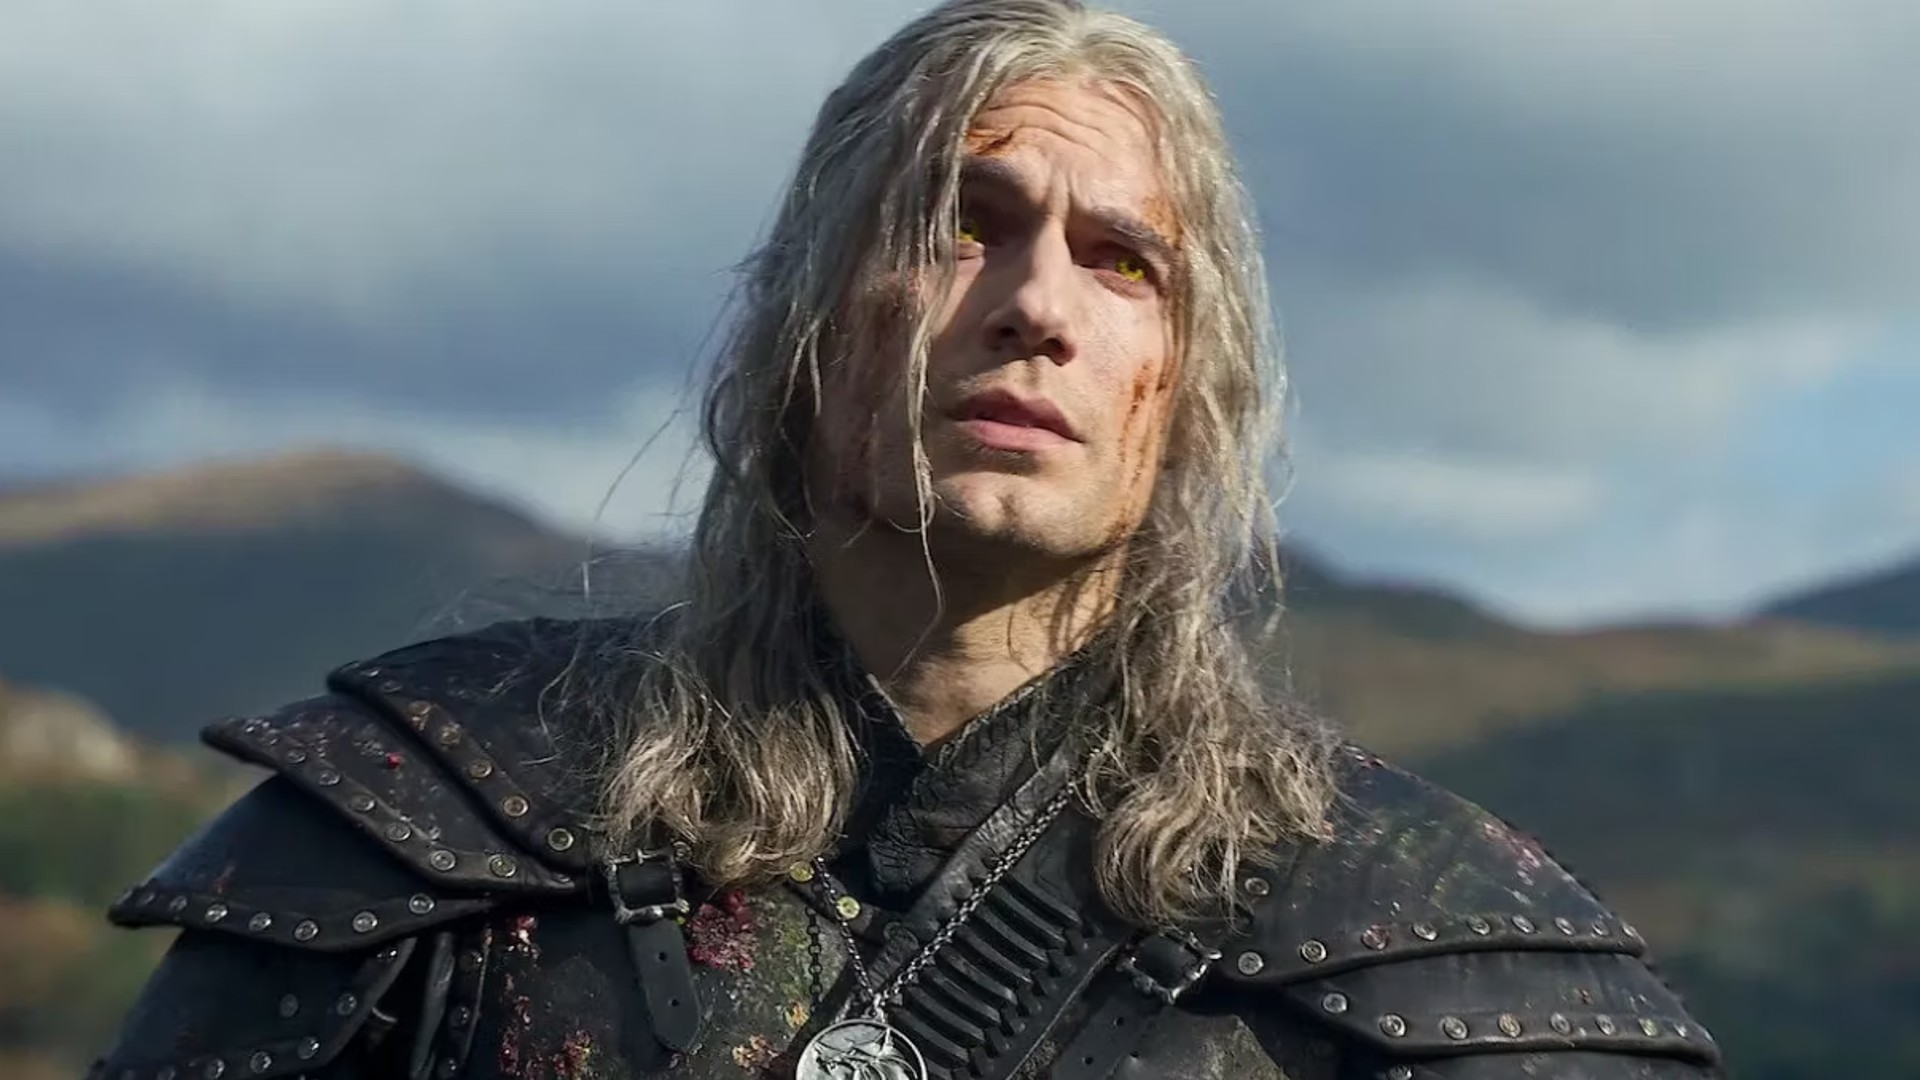 Disastrous DCU Update Makes Henry Cavill's Witcher Exit That Much Worse